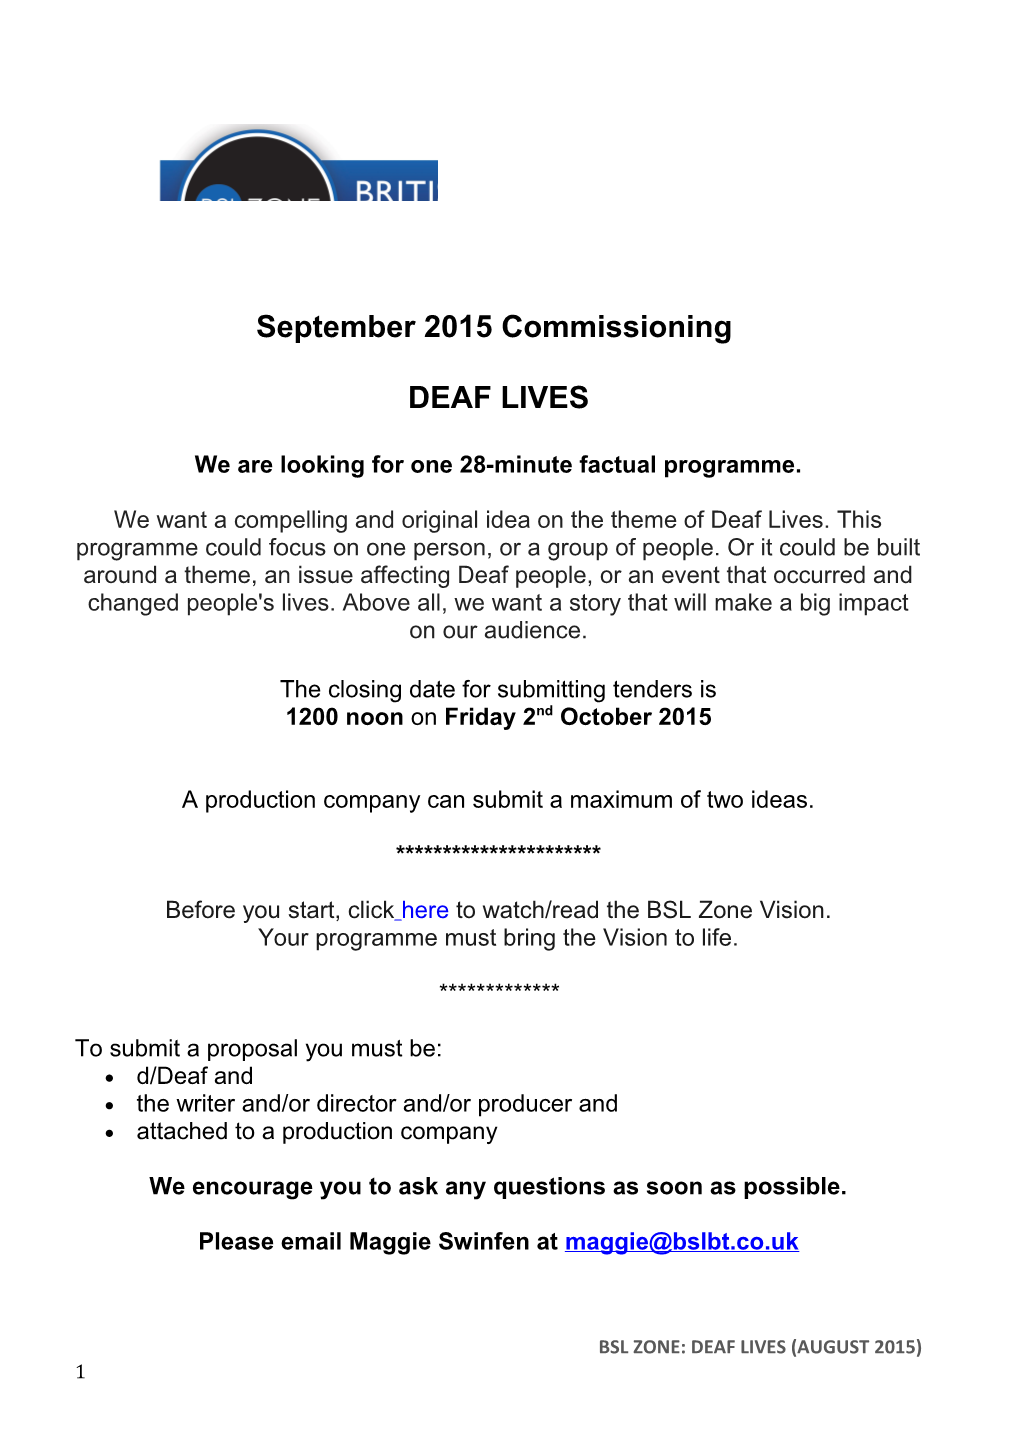 BSL Zone: DEAF LIVES (AUGUST 2015)